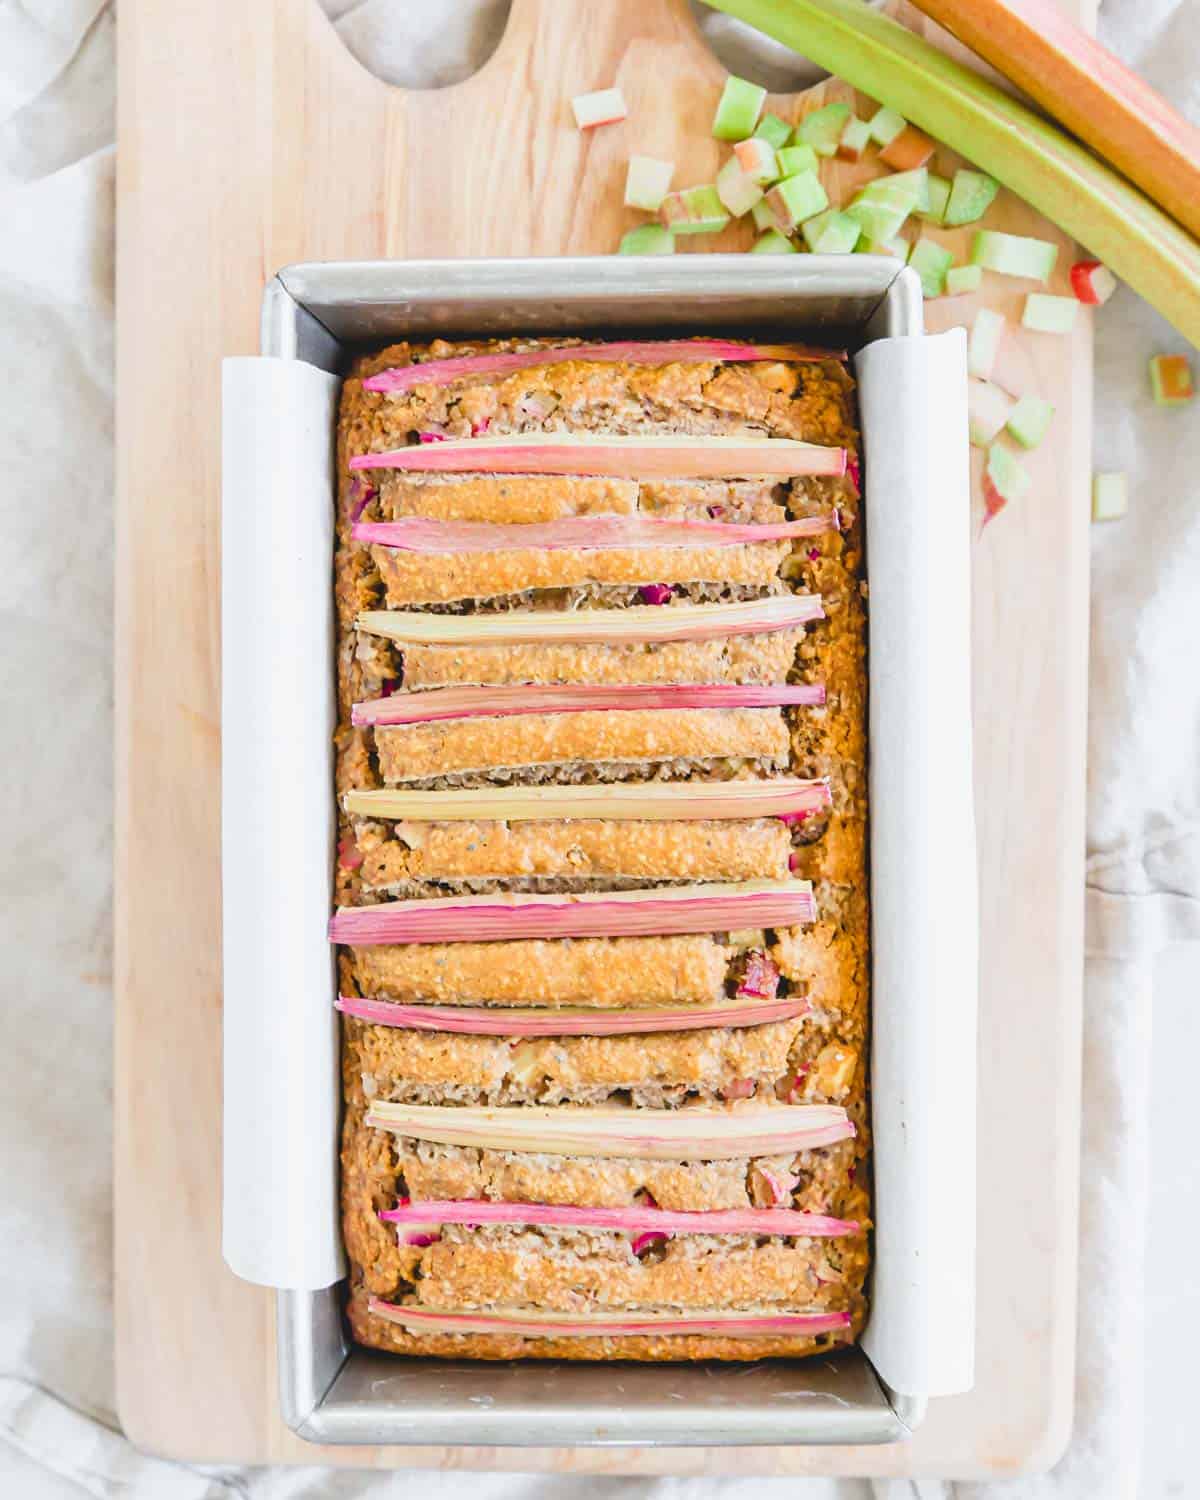 Baked gluten free rhubarb bread in a loaf pan with parchment paper.